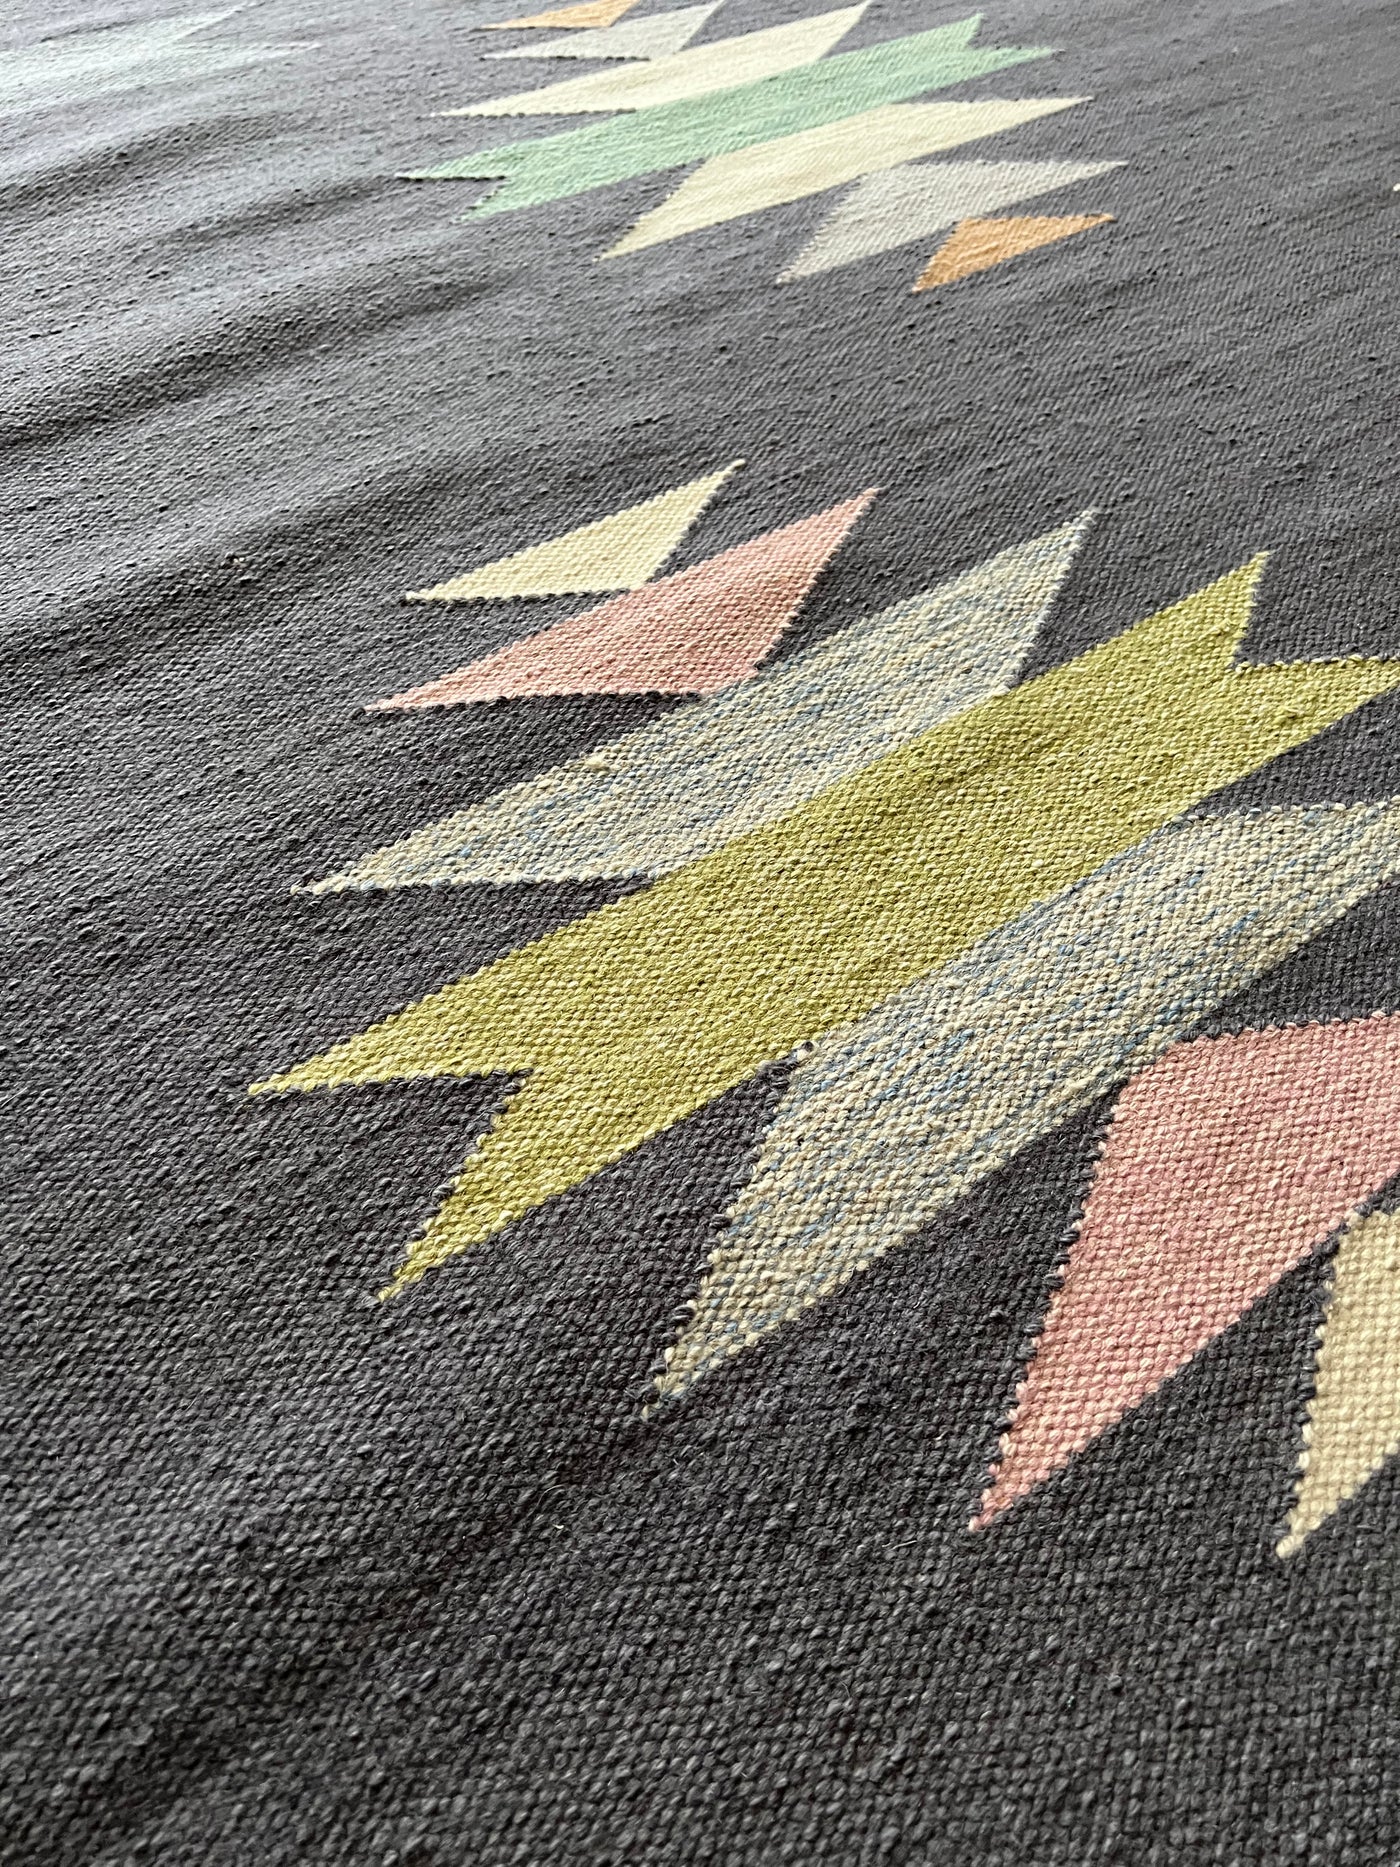 The Mimosa Rug